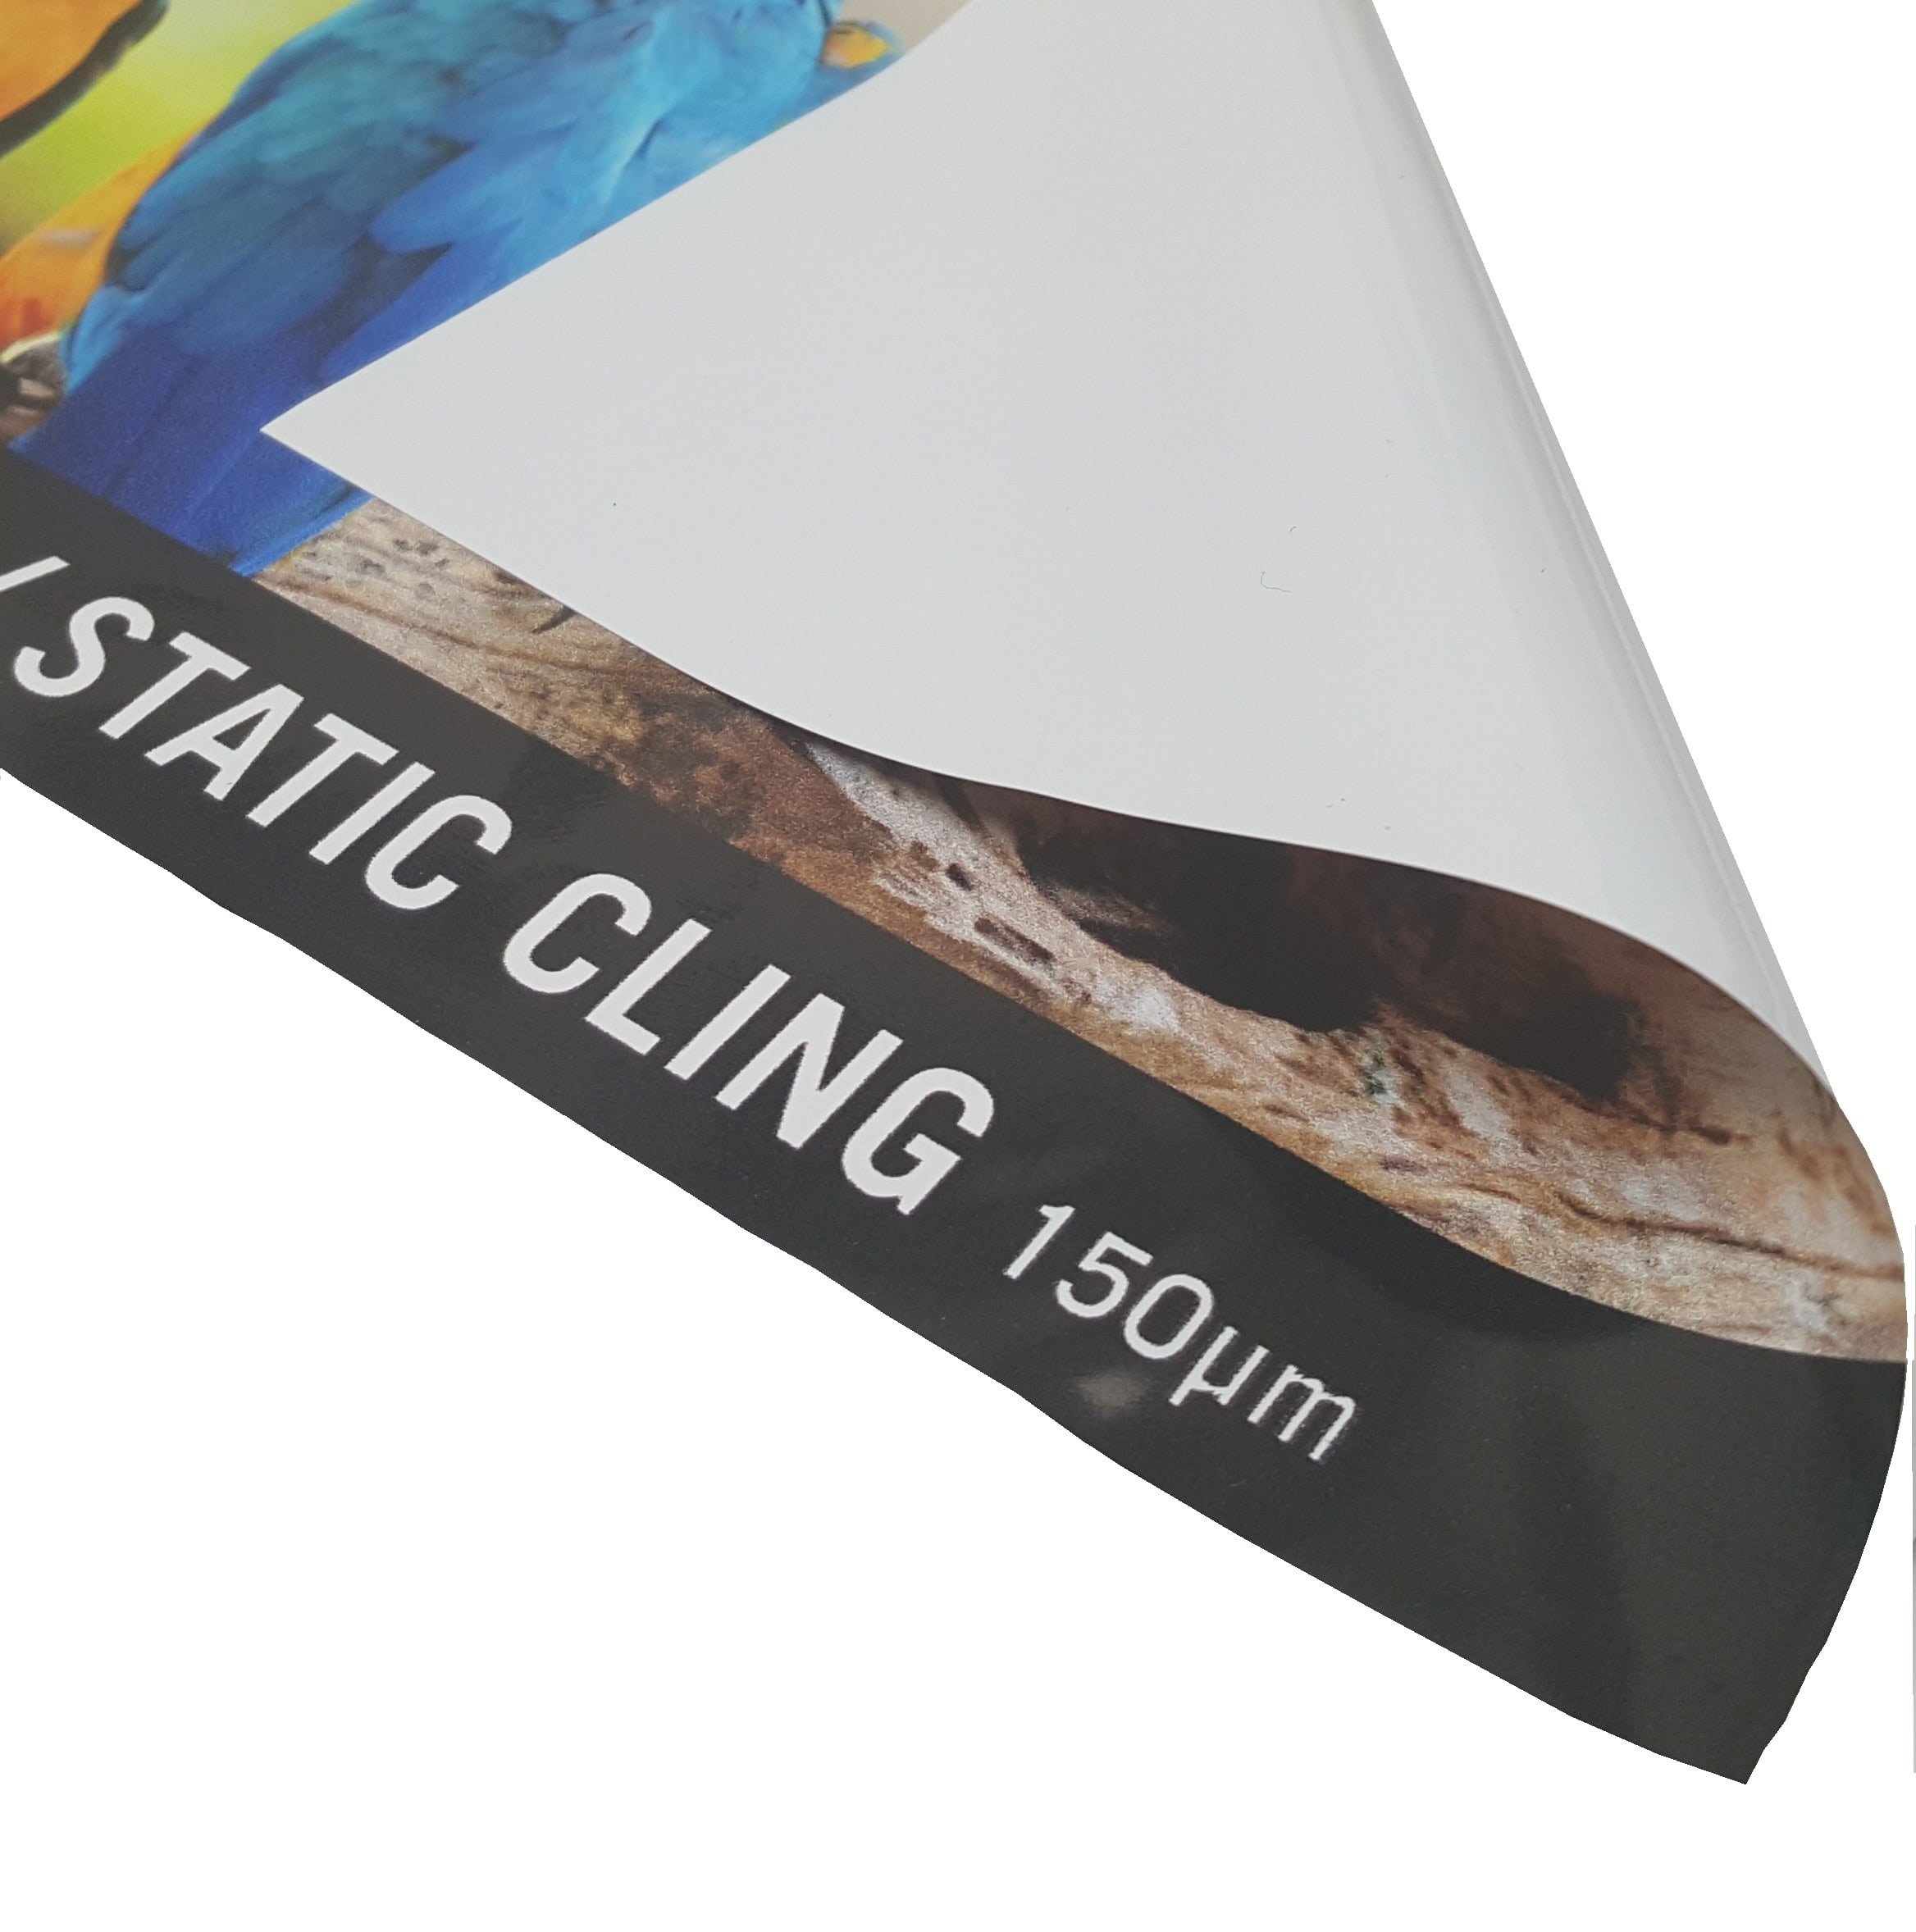 Self Cling Window Sticker Printing UK, Next Day Delivery - www.ontimeprint.co.uk